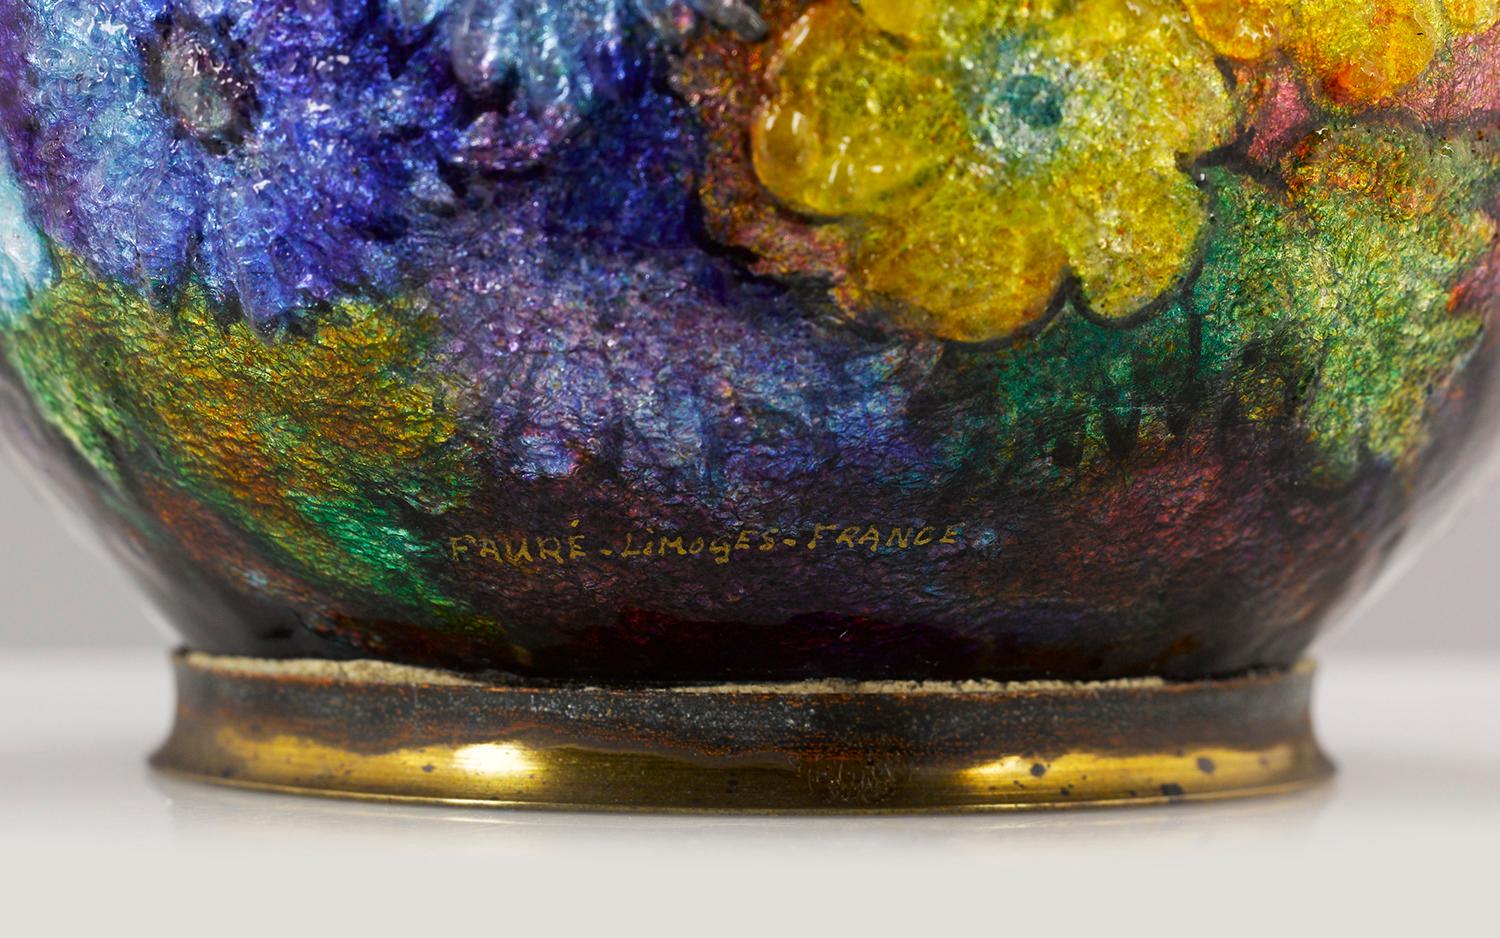 A rainbow of blooms cover this rare Limoges enameled vase by Camille Fauré. The firm employs its signature raised enameling in this piece, which is achieved by applying silver leaf and an enamel paste to a copper base form and “building it” before